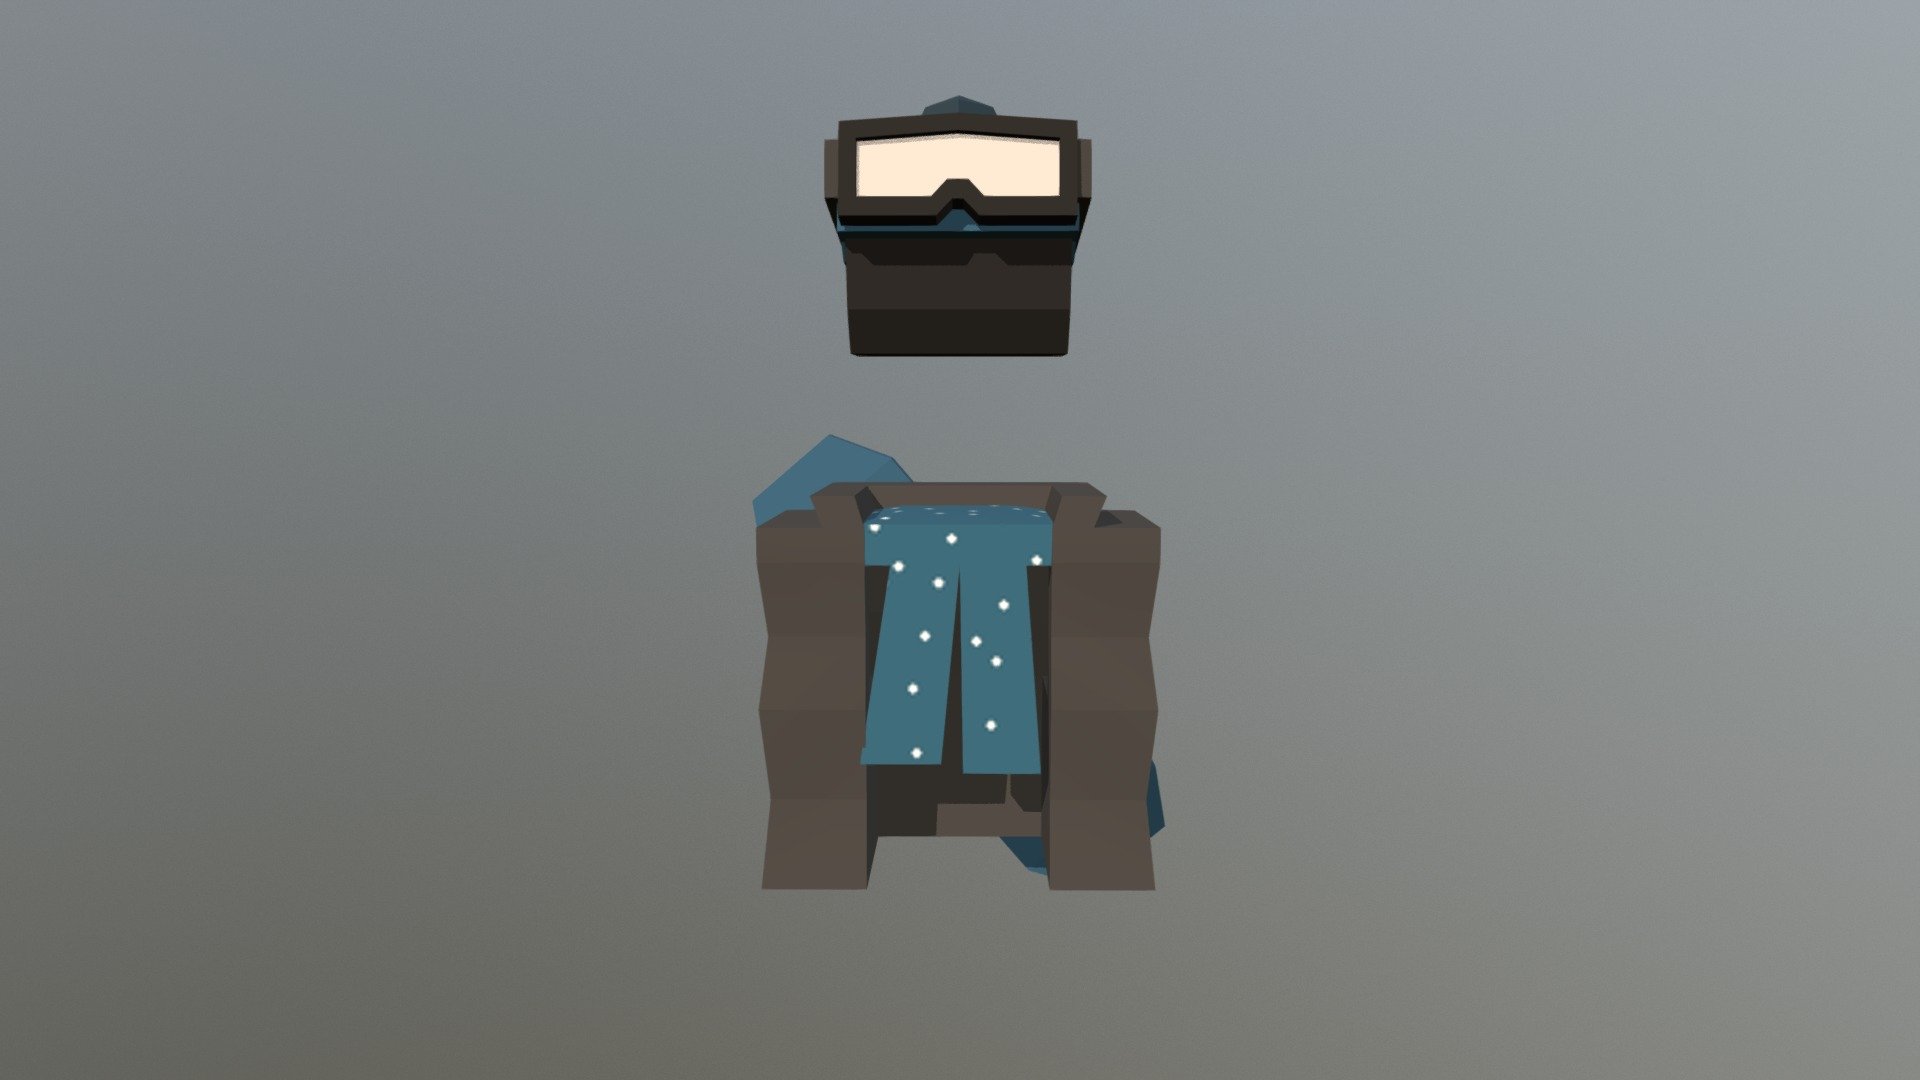 Snowboarder Items